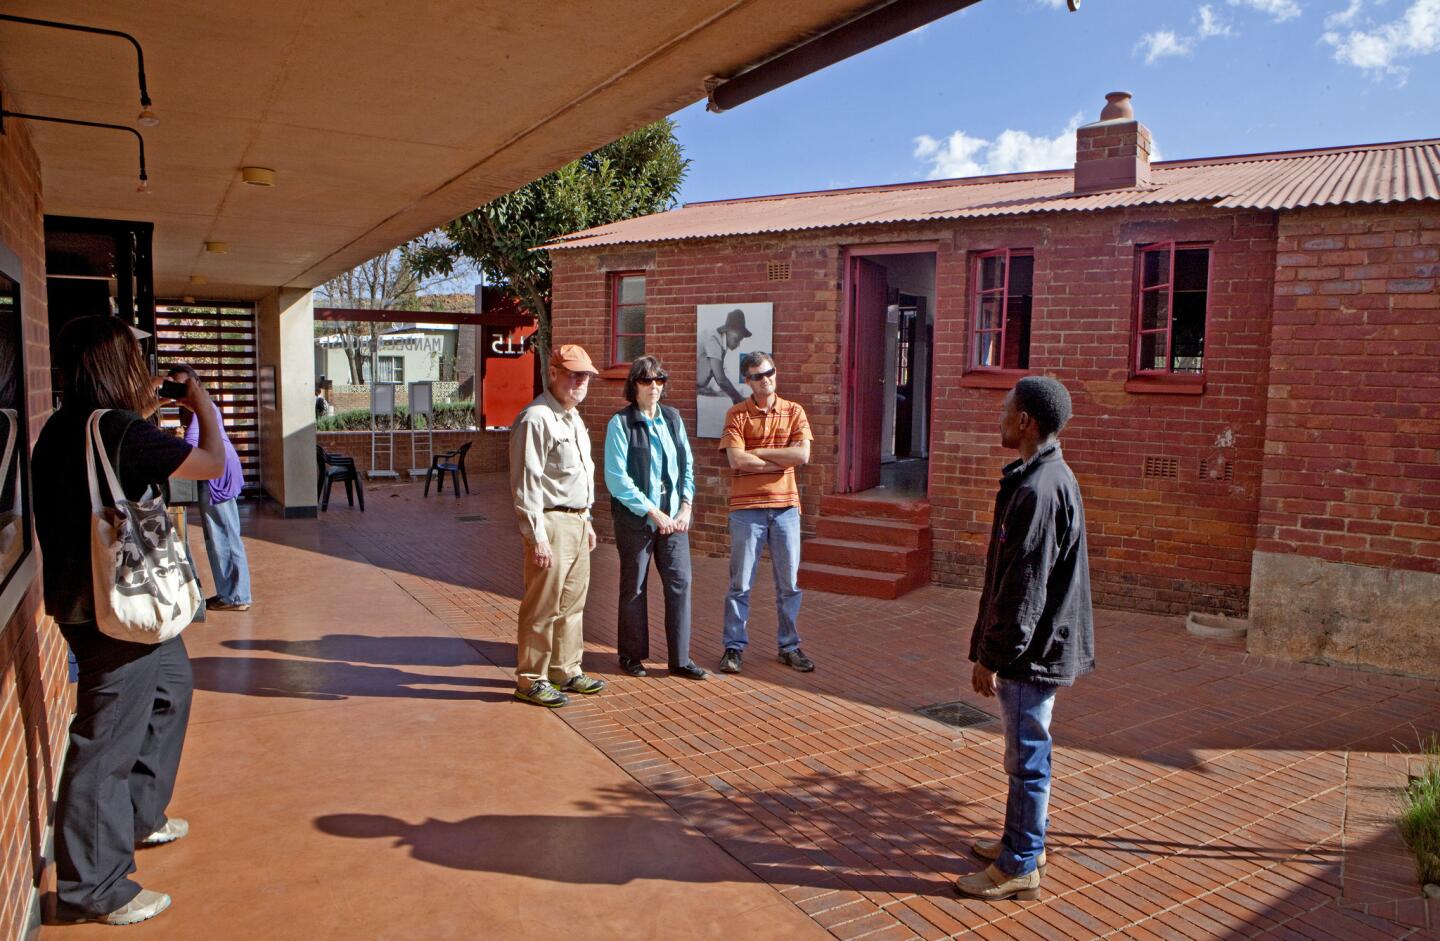 Tourists from the U.S. visit the Nelson Mandela house on Vilakazi Street that is now a museum in Soweto, South Africa. It is one of the biggest tourist attractions in the area. The Mandelas lived here in the 1960s before Nelson was imprisoned.